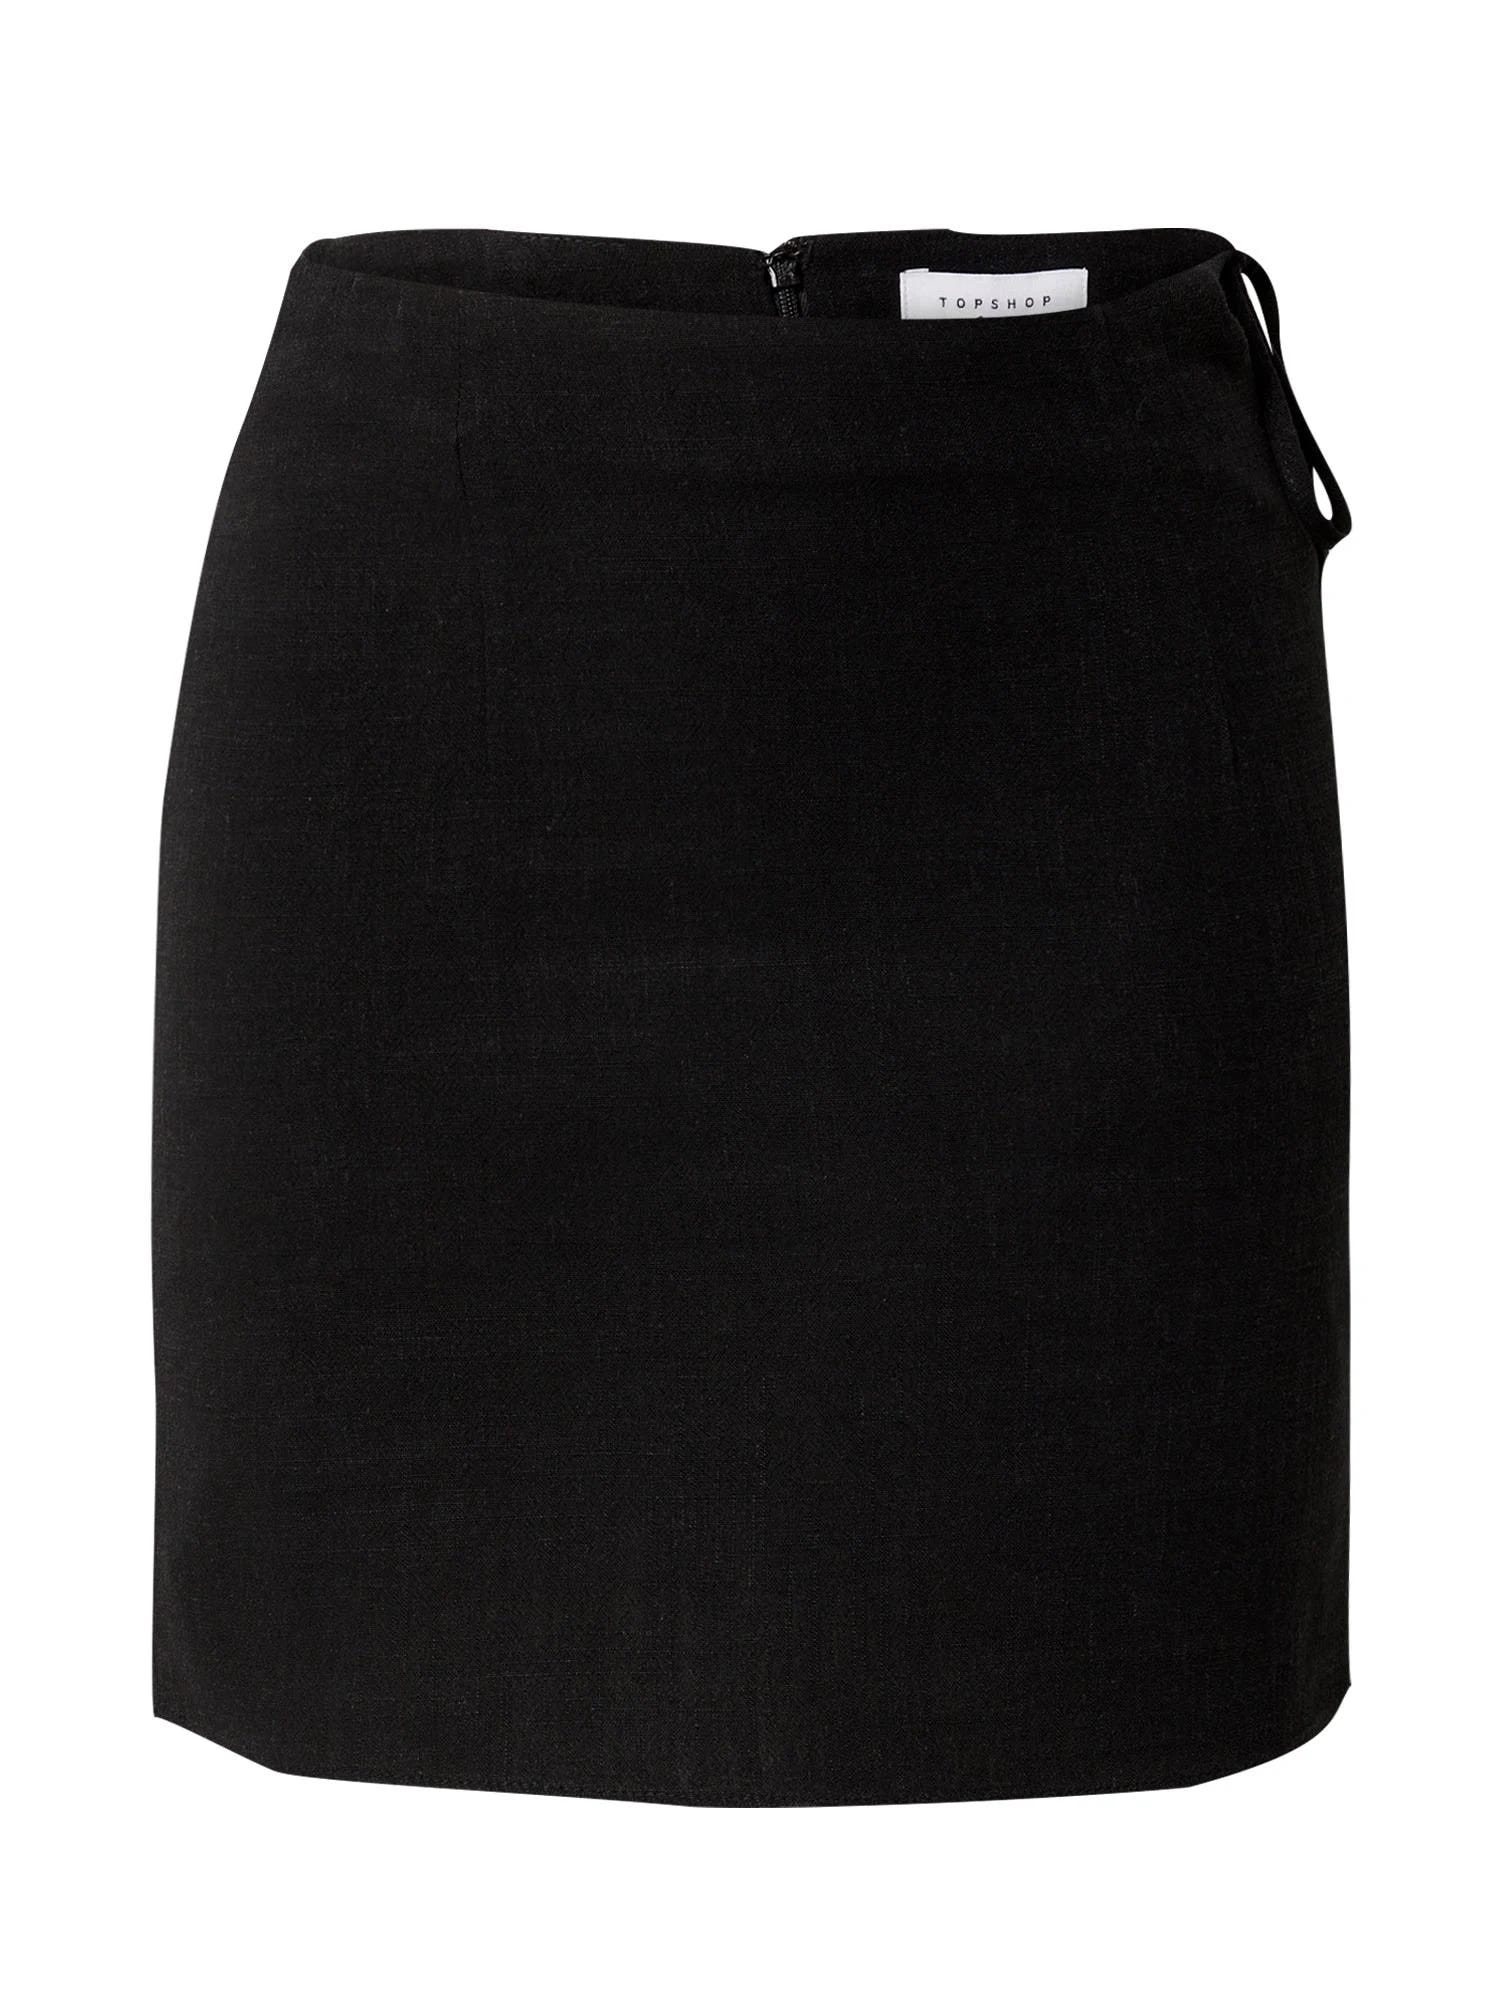 Black High Waist Cutout Mini Skirt from Topshop at Nordstrom | Image